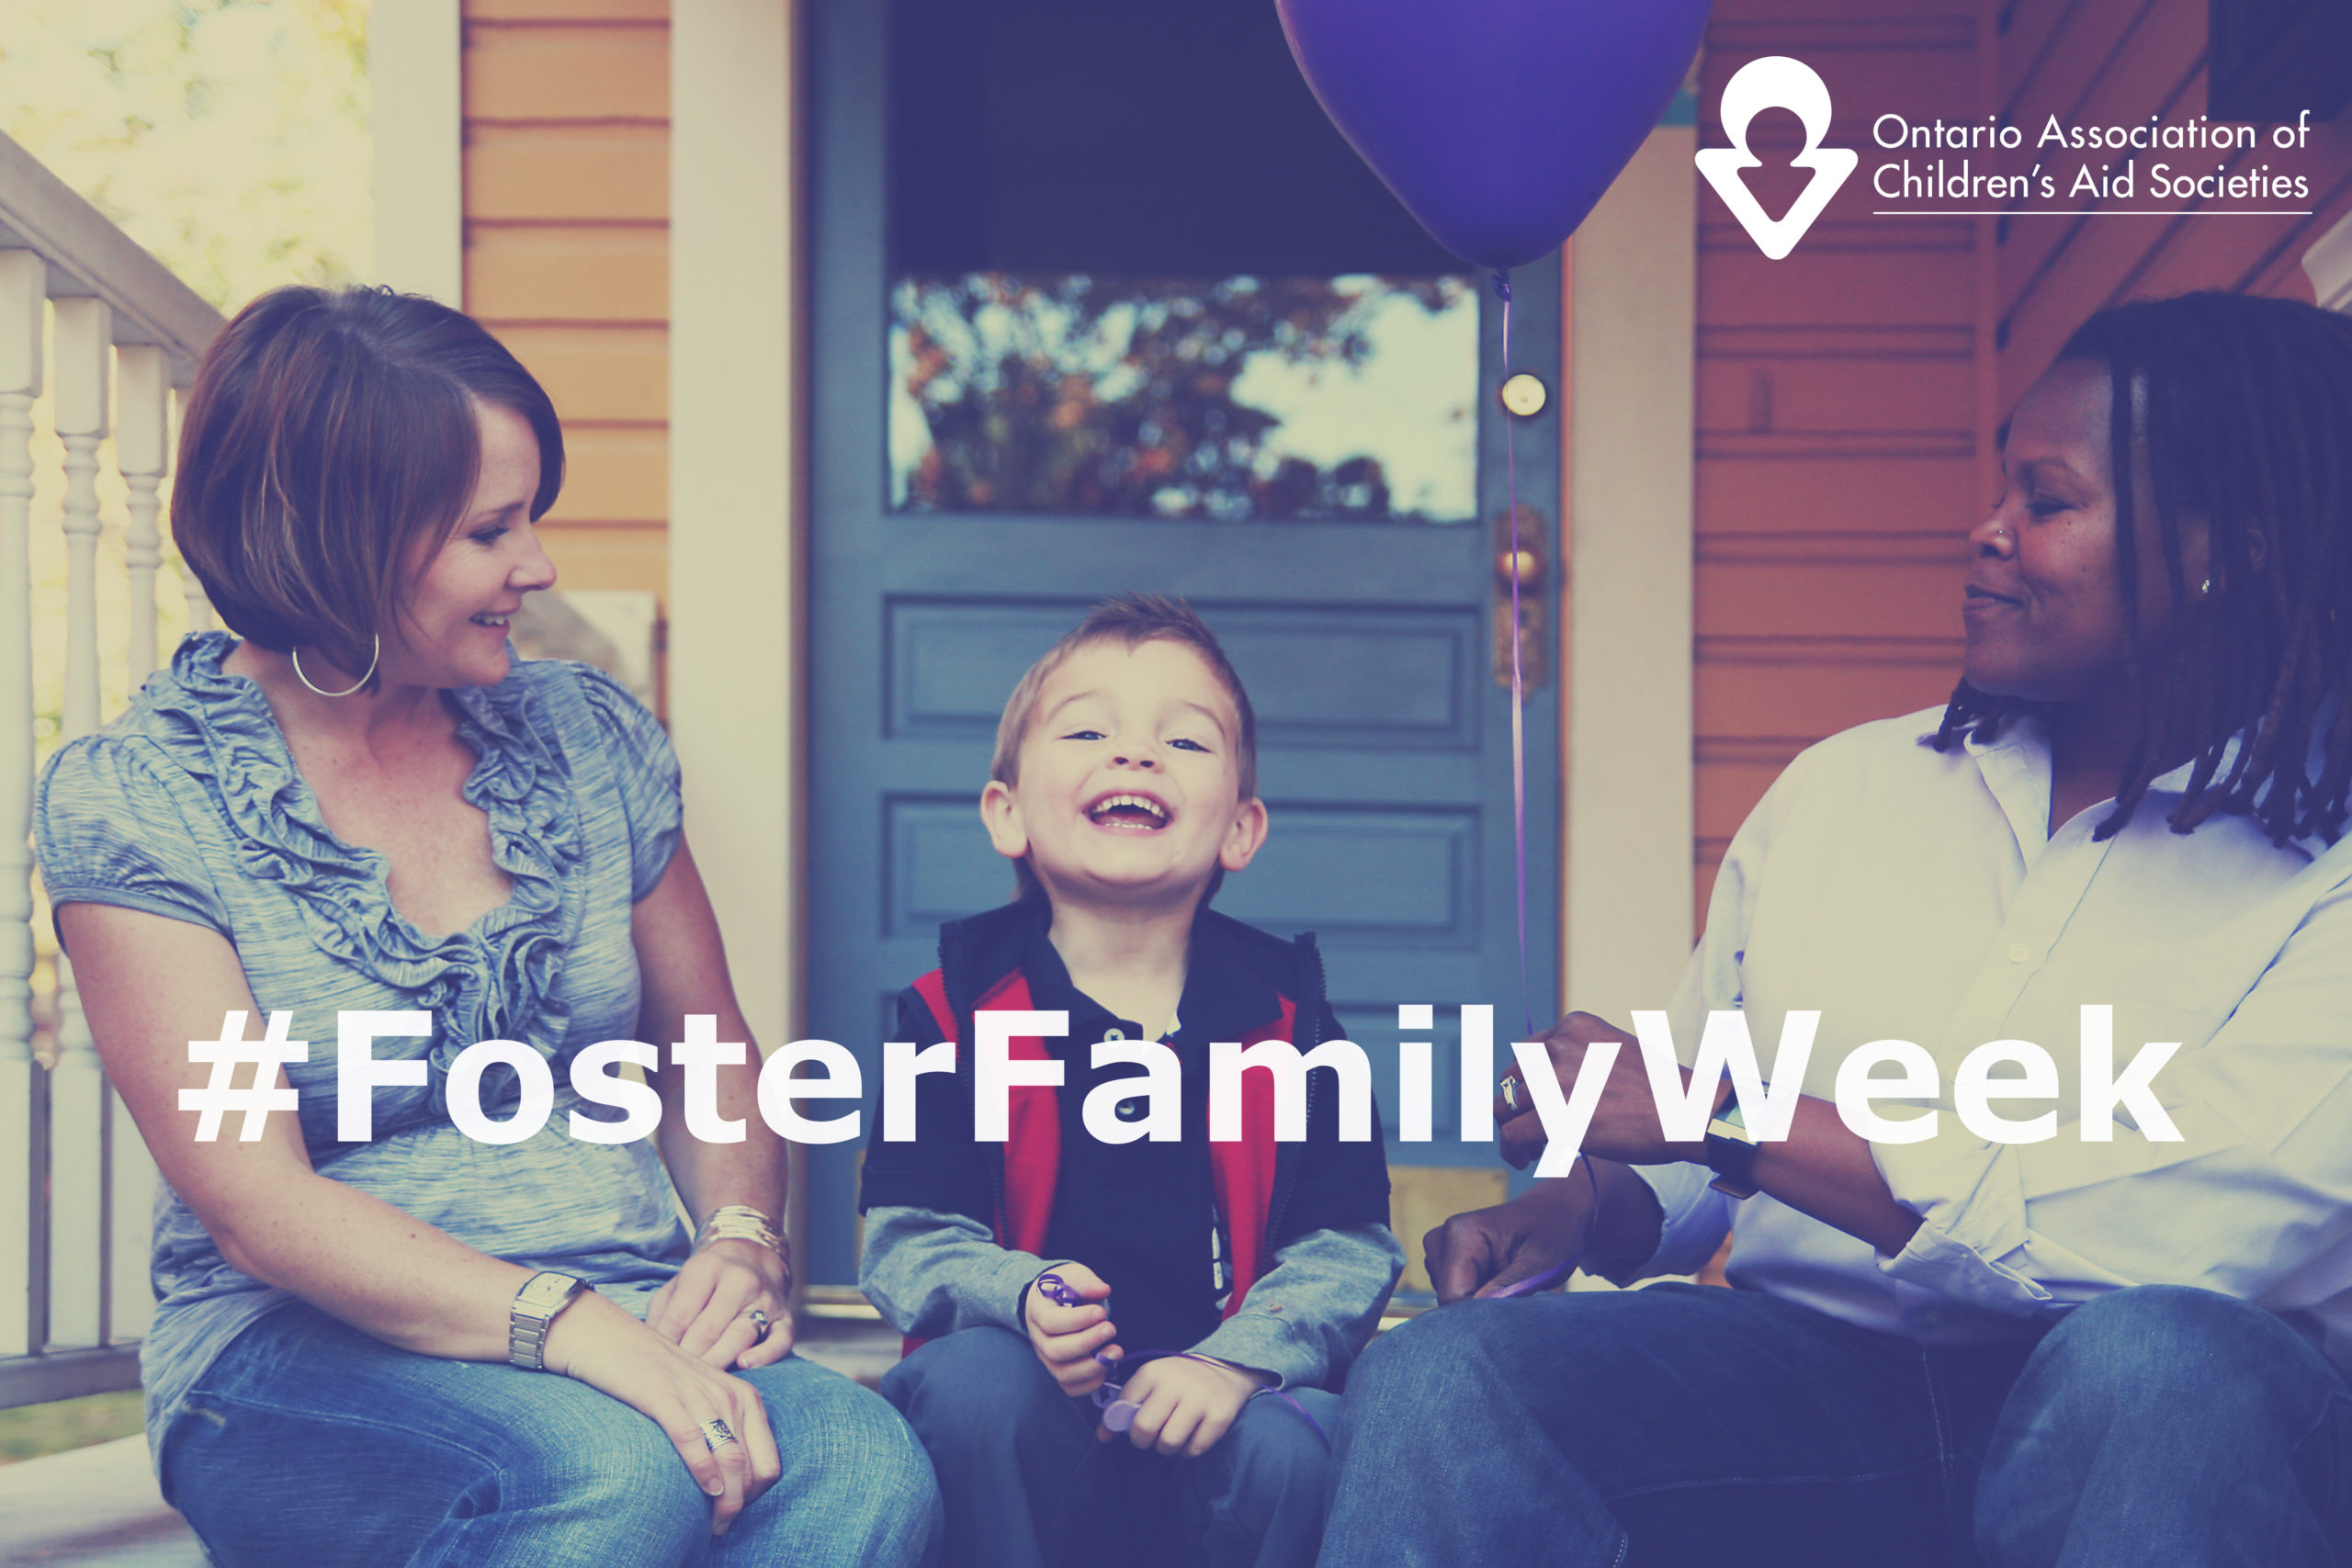 Celebrating Foster Family Appreciation Week 2022 with a Thank You Message for Foster Caregivers across Ontario